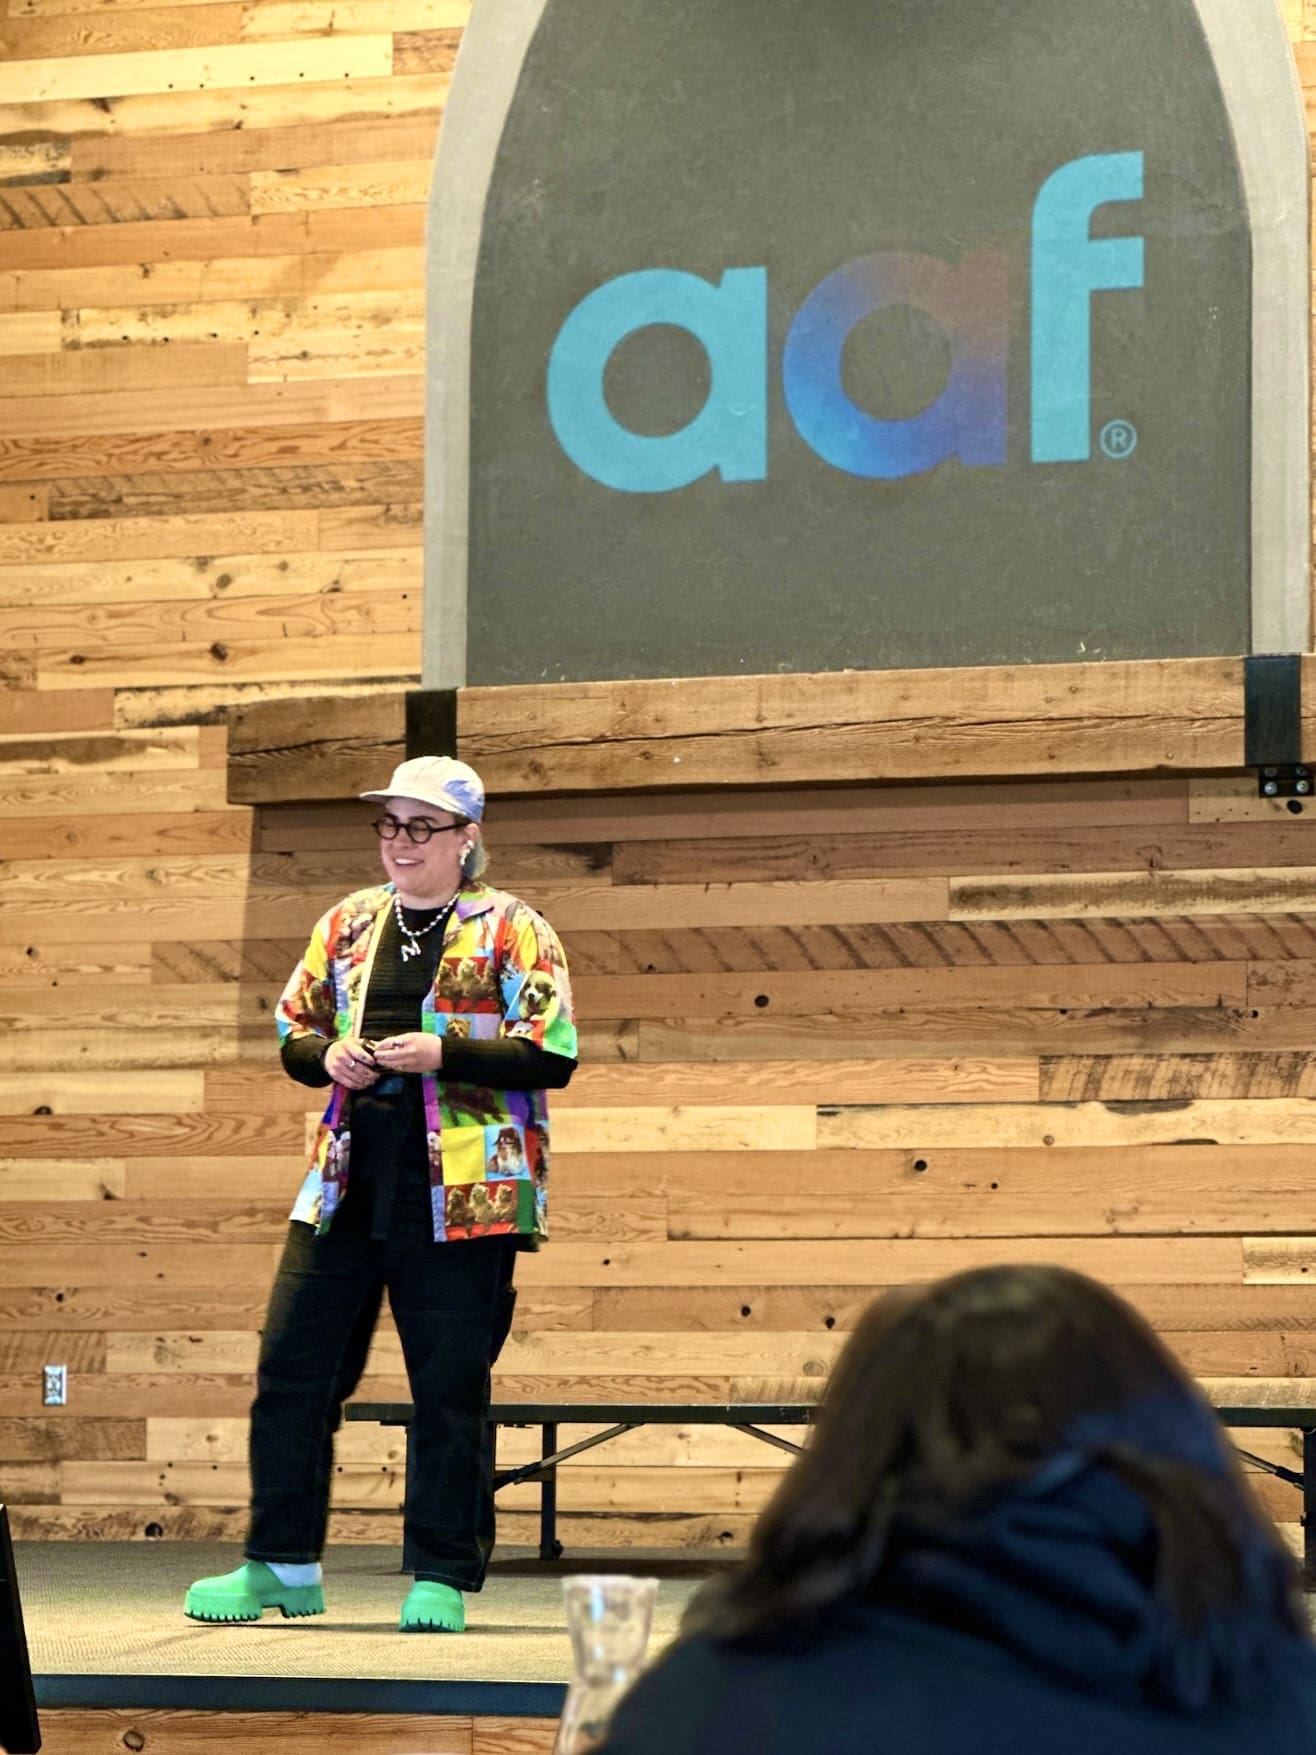 A speaker stands in front of a large American Advertising Federation (AAF) logo displayed on a wood-paneled wall. The speaker is wearing a colorful buttoned shirt, black trousers, and playful green monster feet slippers. They are smiling, seemingly engaged in a light-hearted moment. In the foreground, the back of an audience member's head is visible, suggesting an informal and interactive event atmosphere.